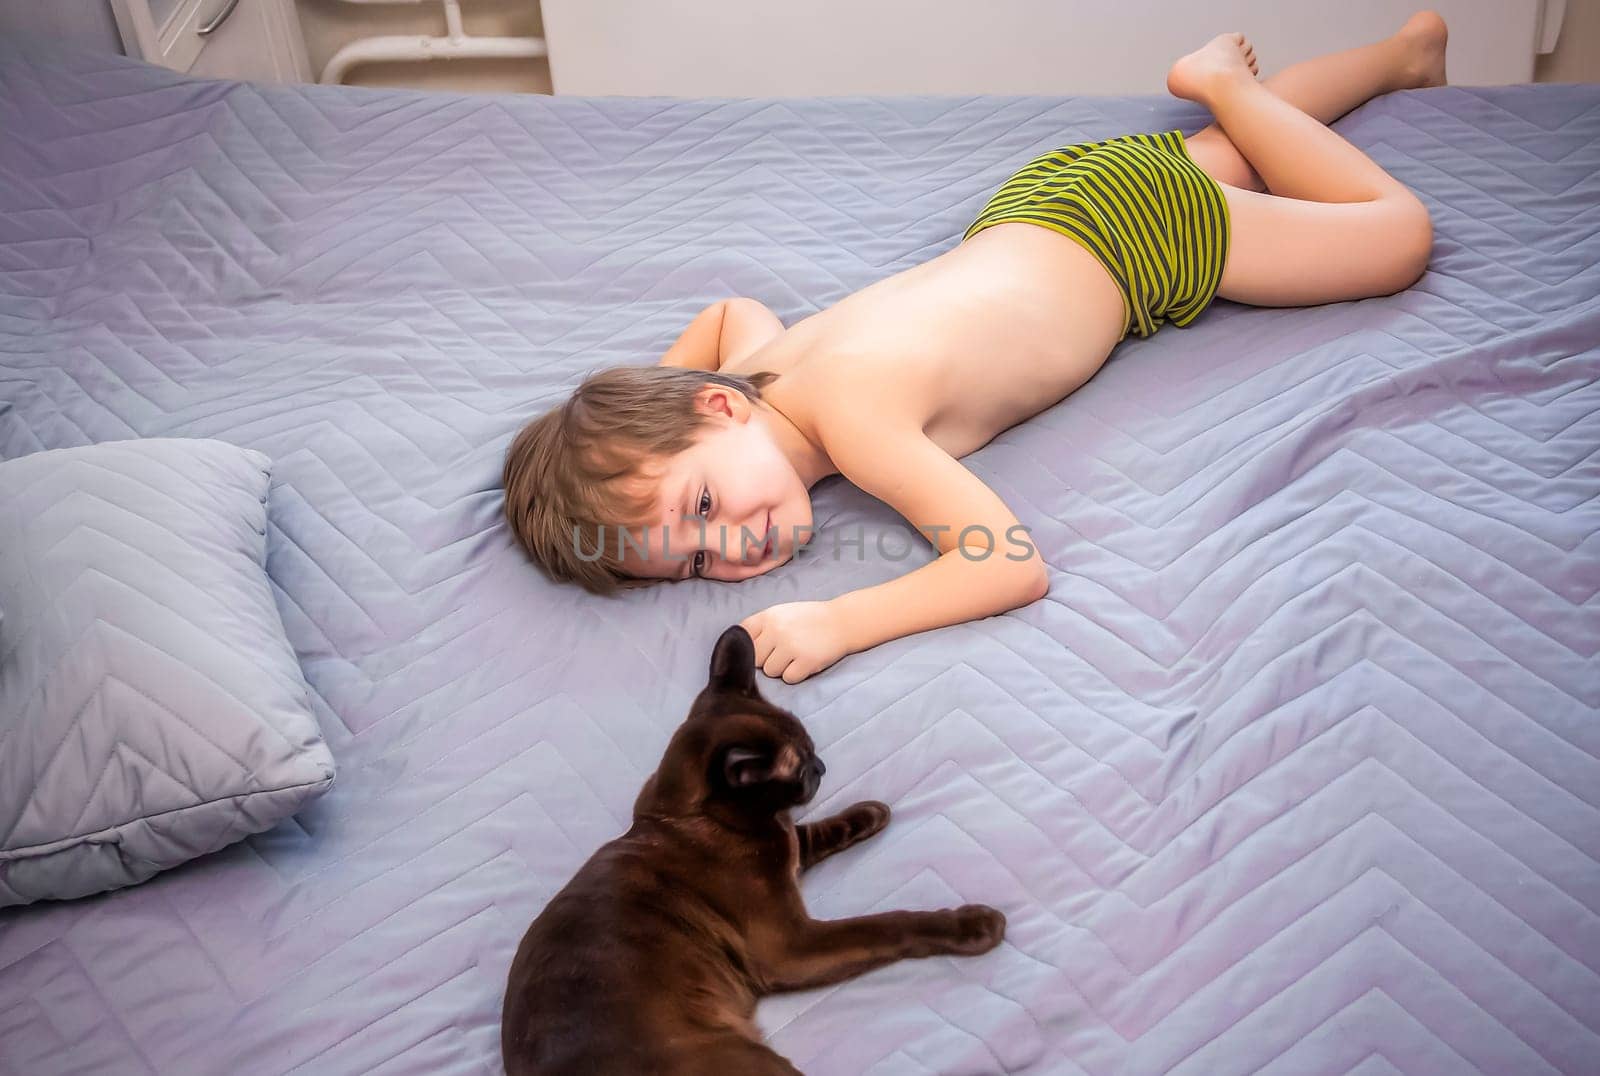 Cute boy without a T-shirt. A blond-haired boy is lying on the bed in a natural setting, and a cat is next to him. The face expresses natural emotions. Not staged photos from nature.